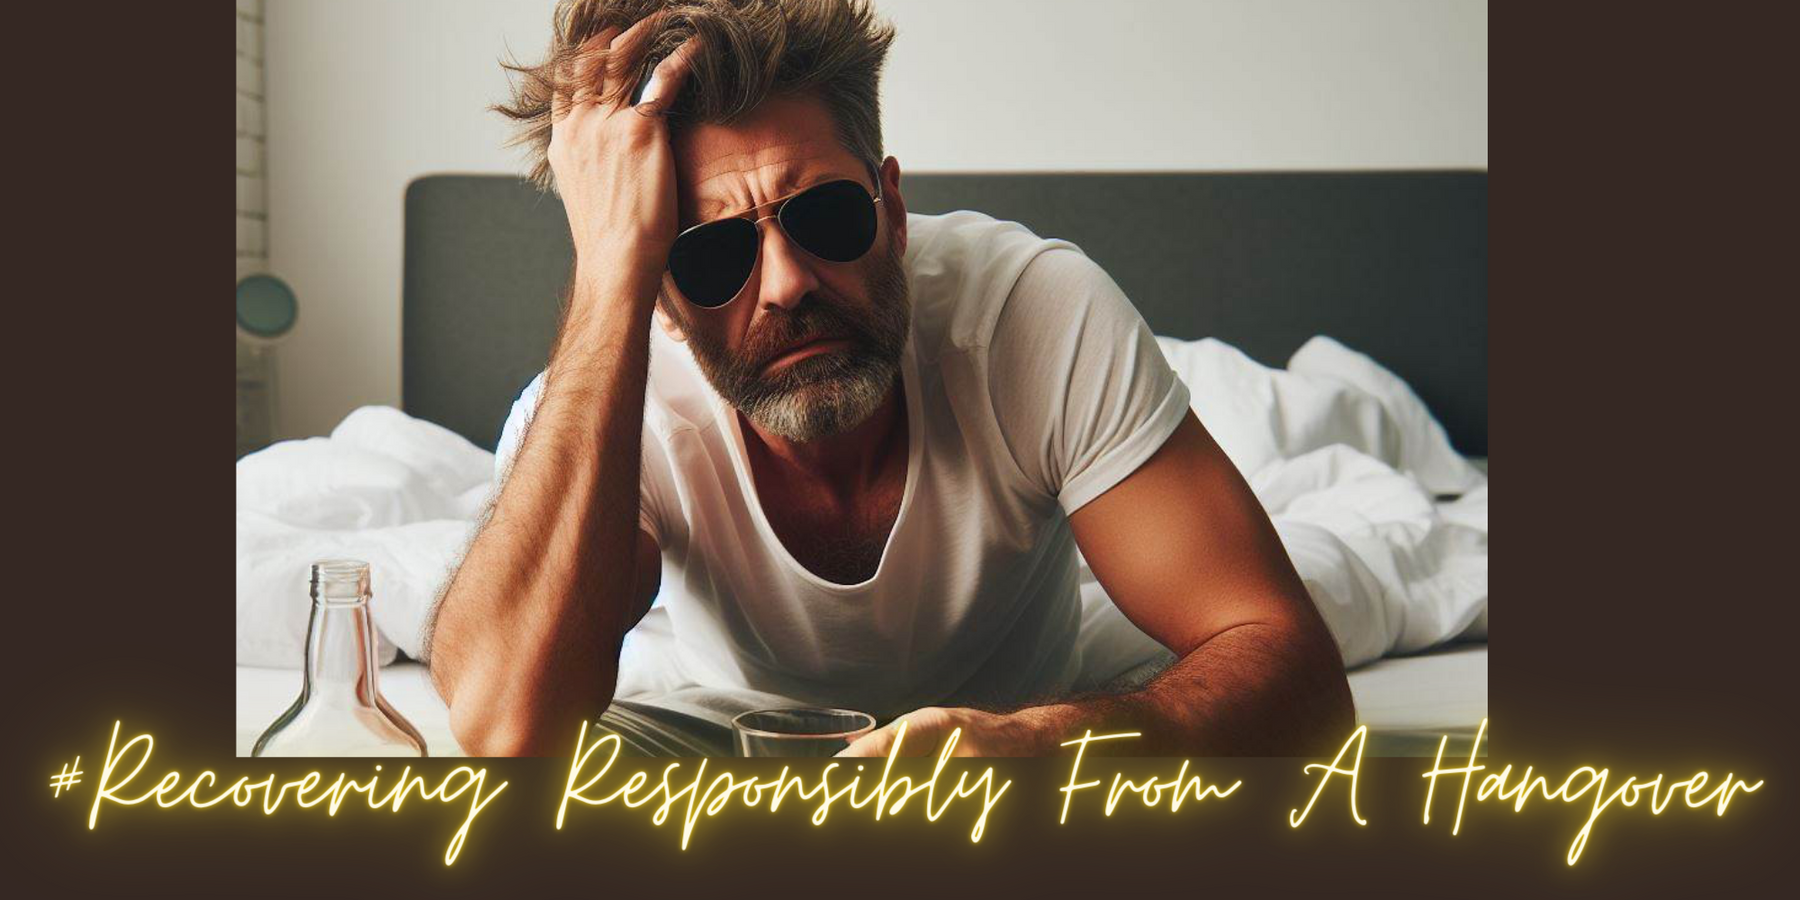 5 Tips For Responsible Hangover Recovery